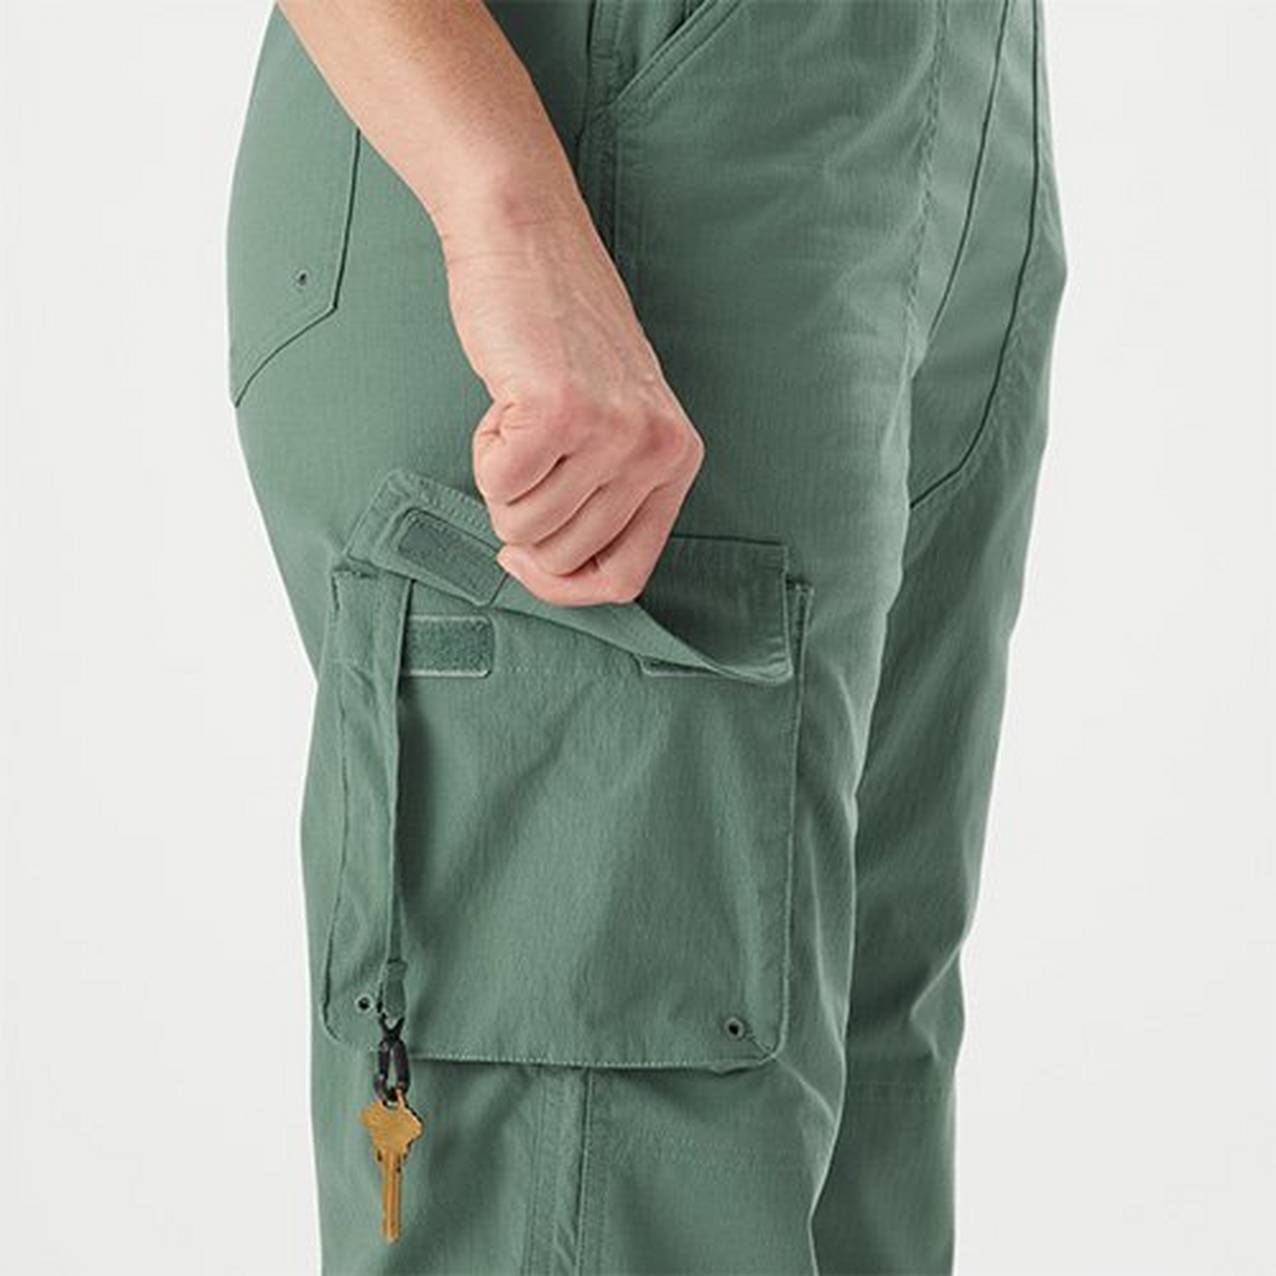 image of person opening cargo pocket on overalls 